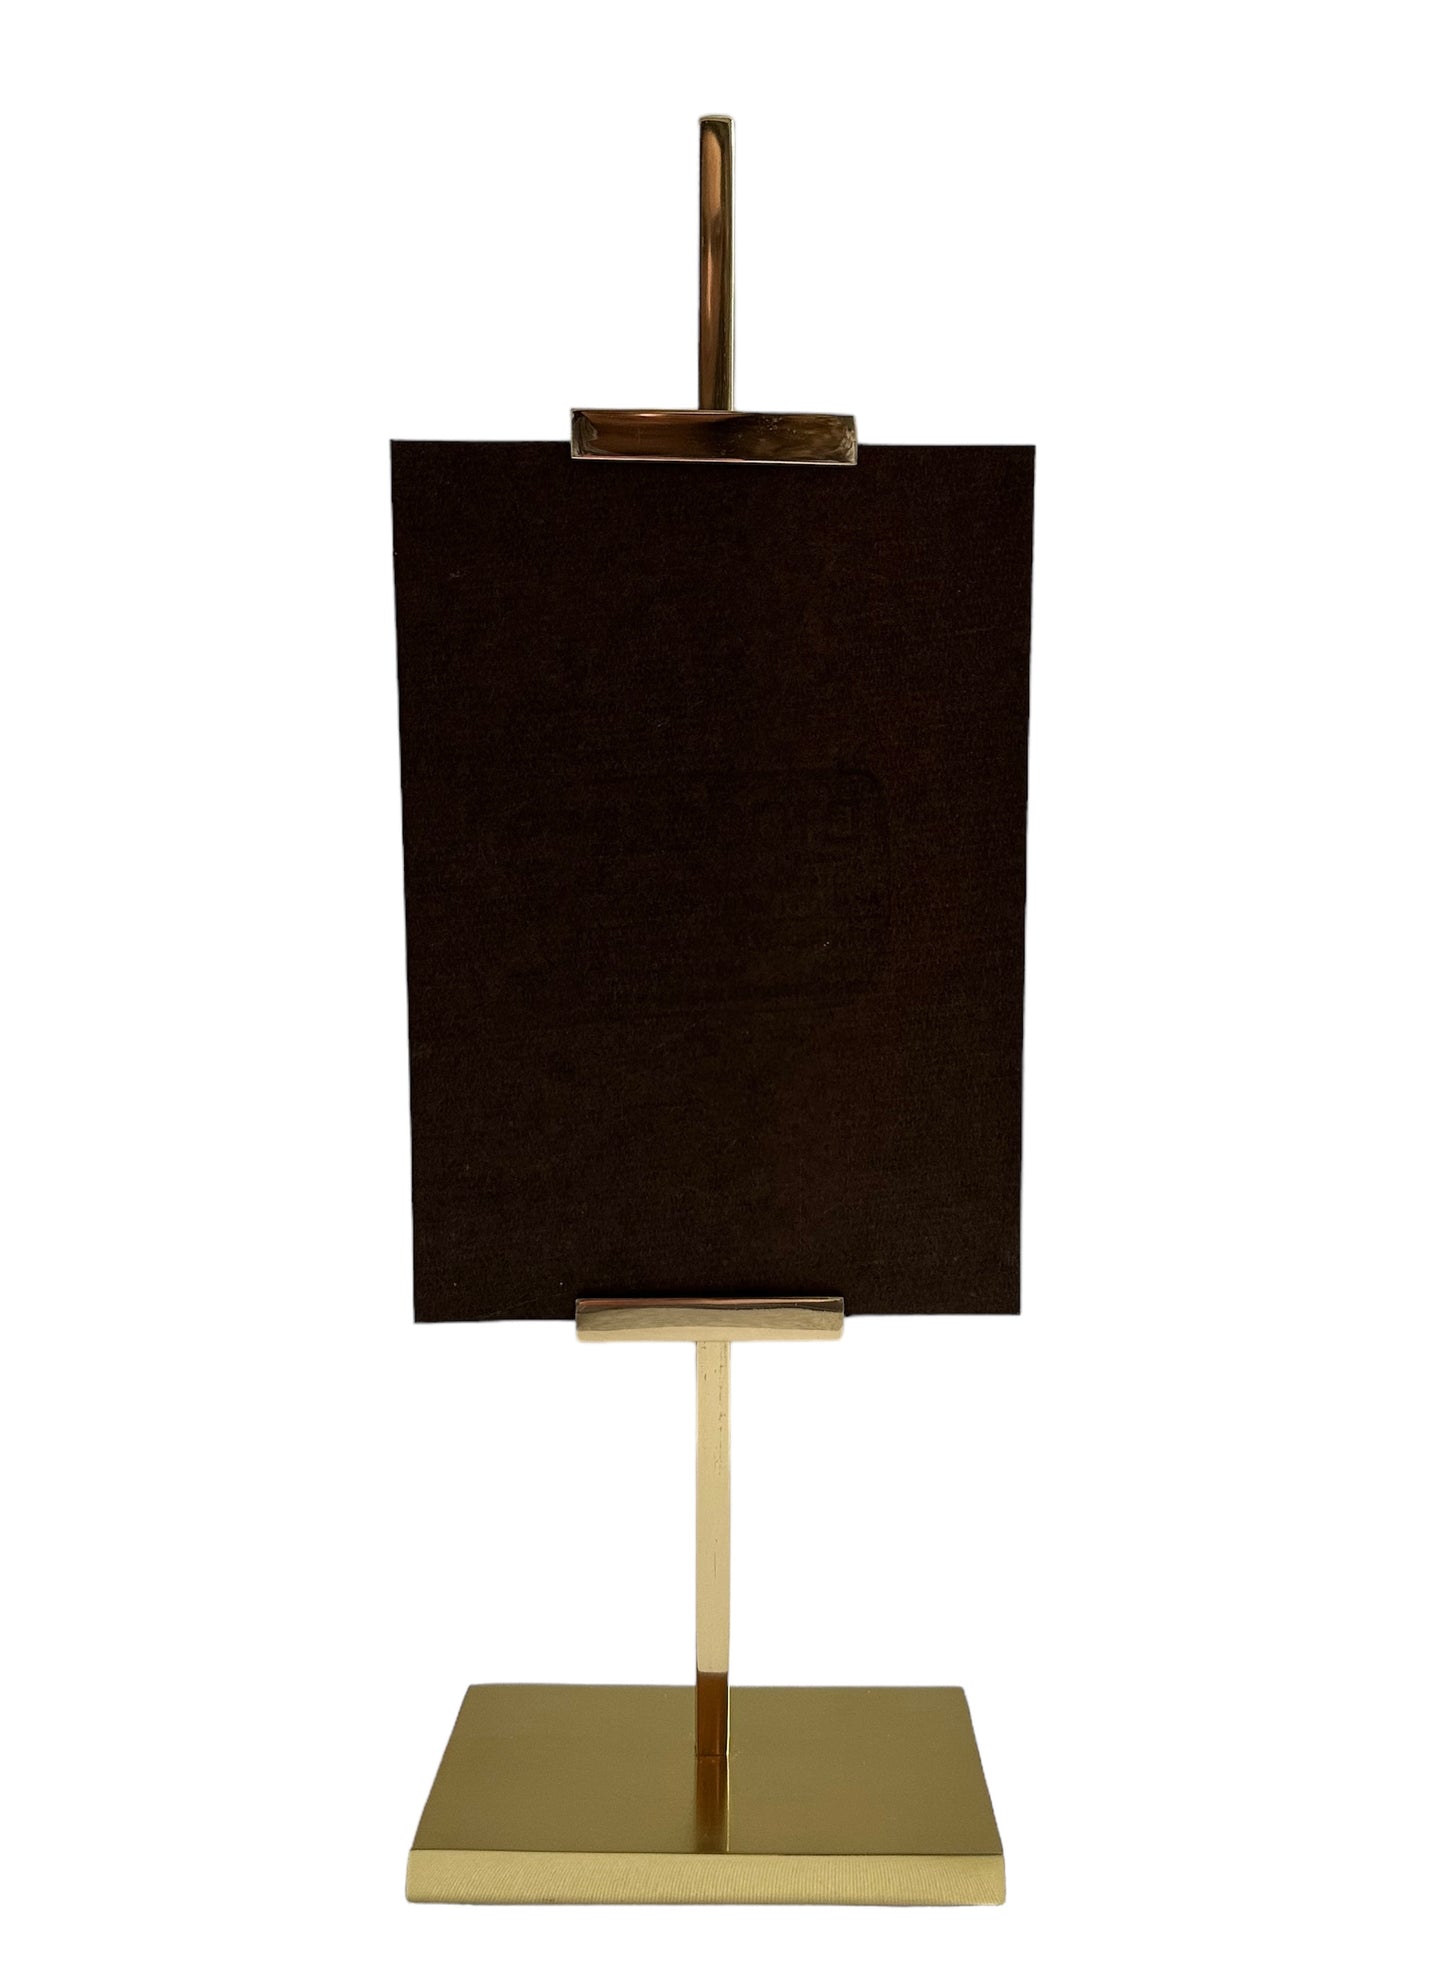 Gallery Easel Small